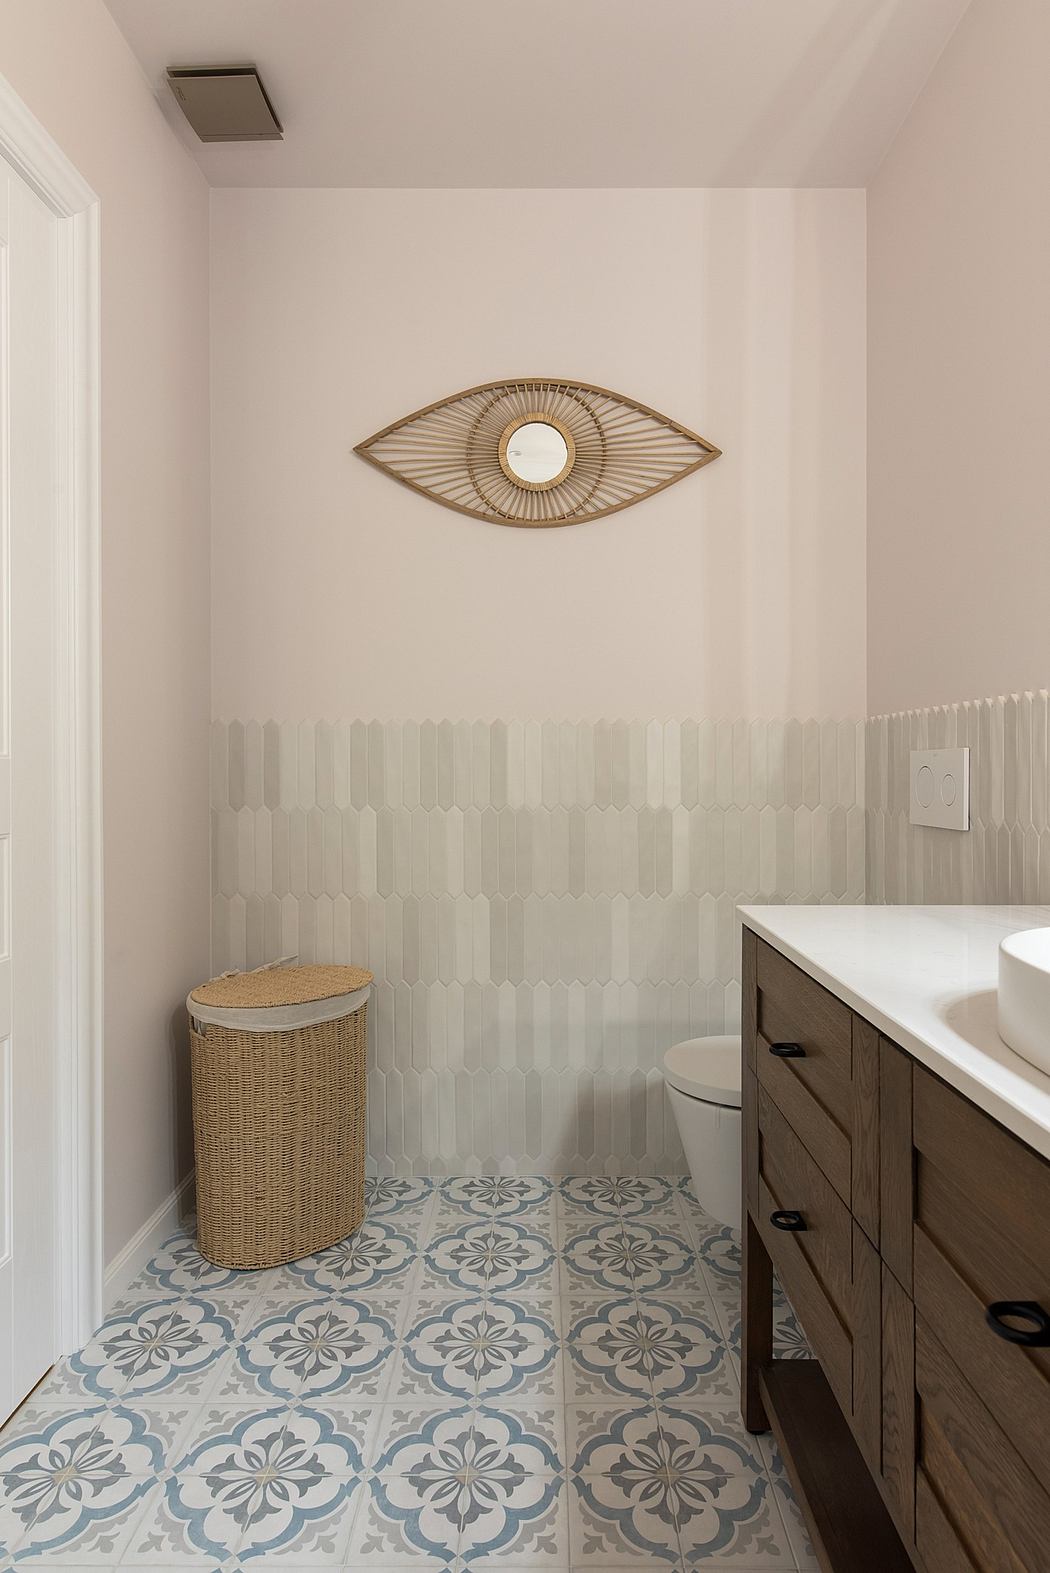 Modern bathroom with patterned floor tiles and decorative wall sconce.